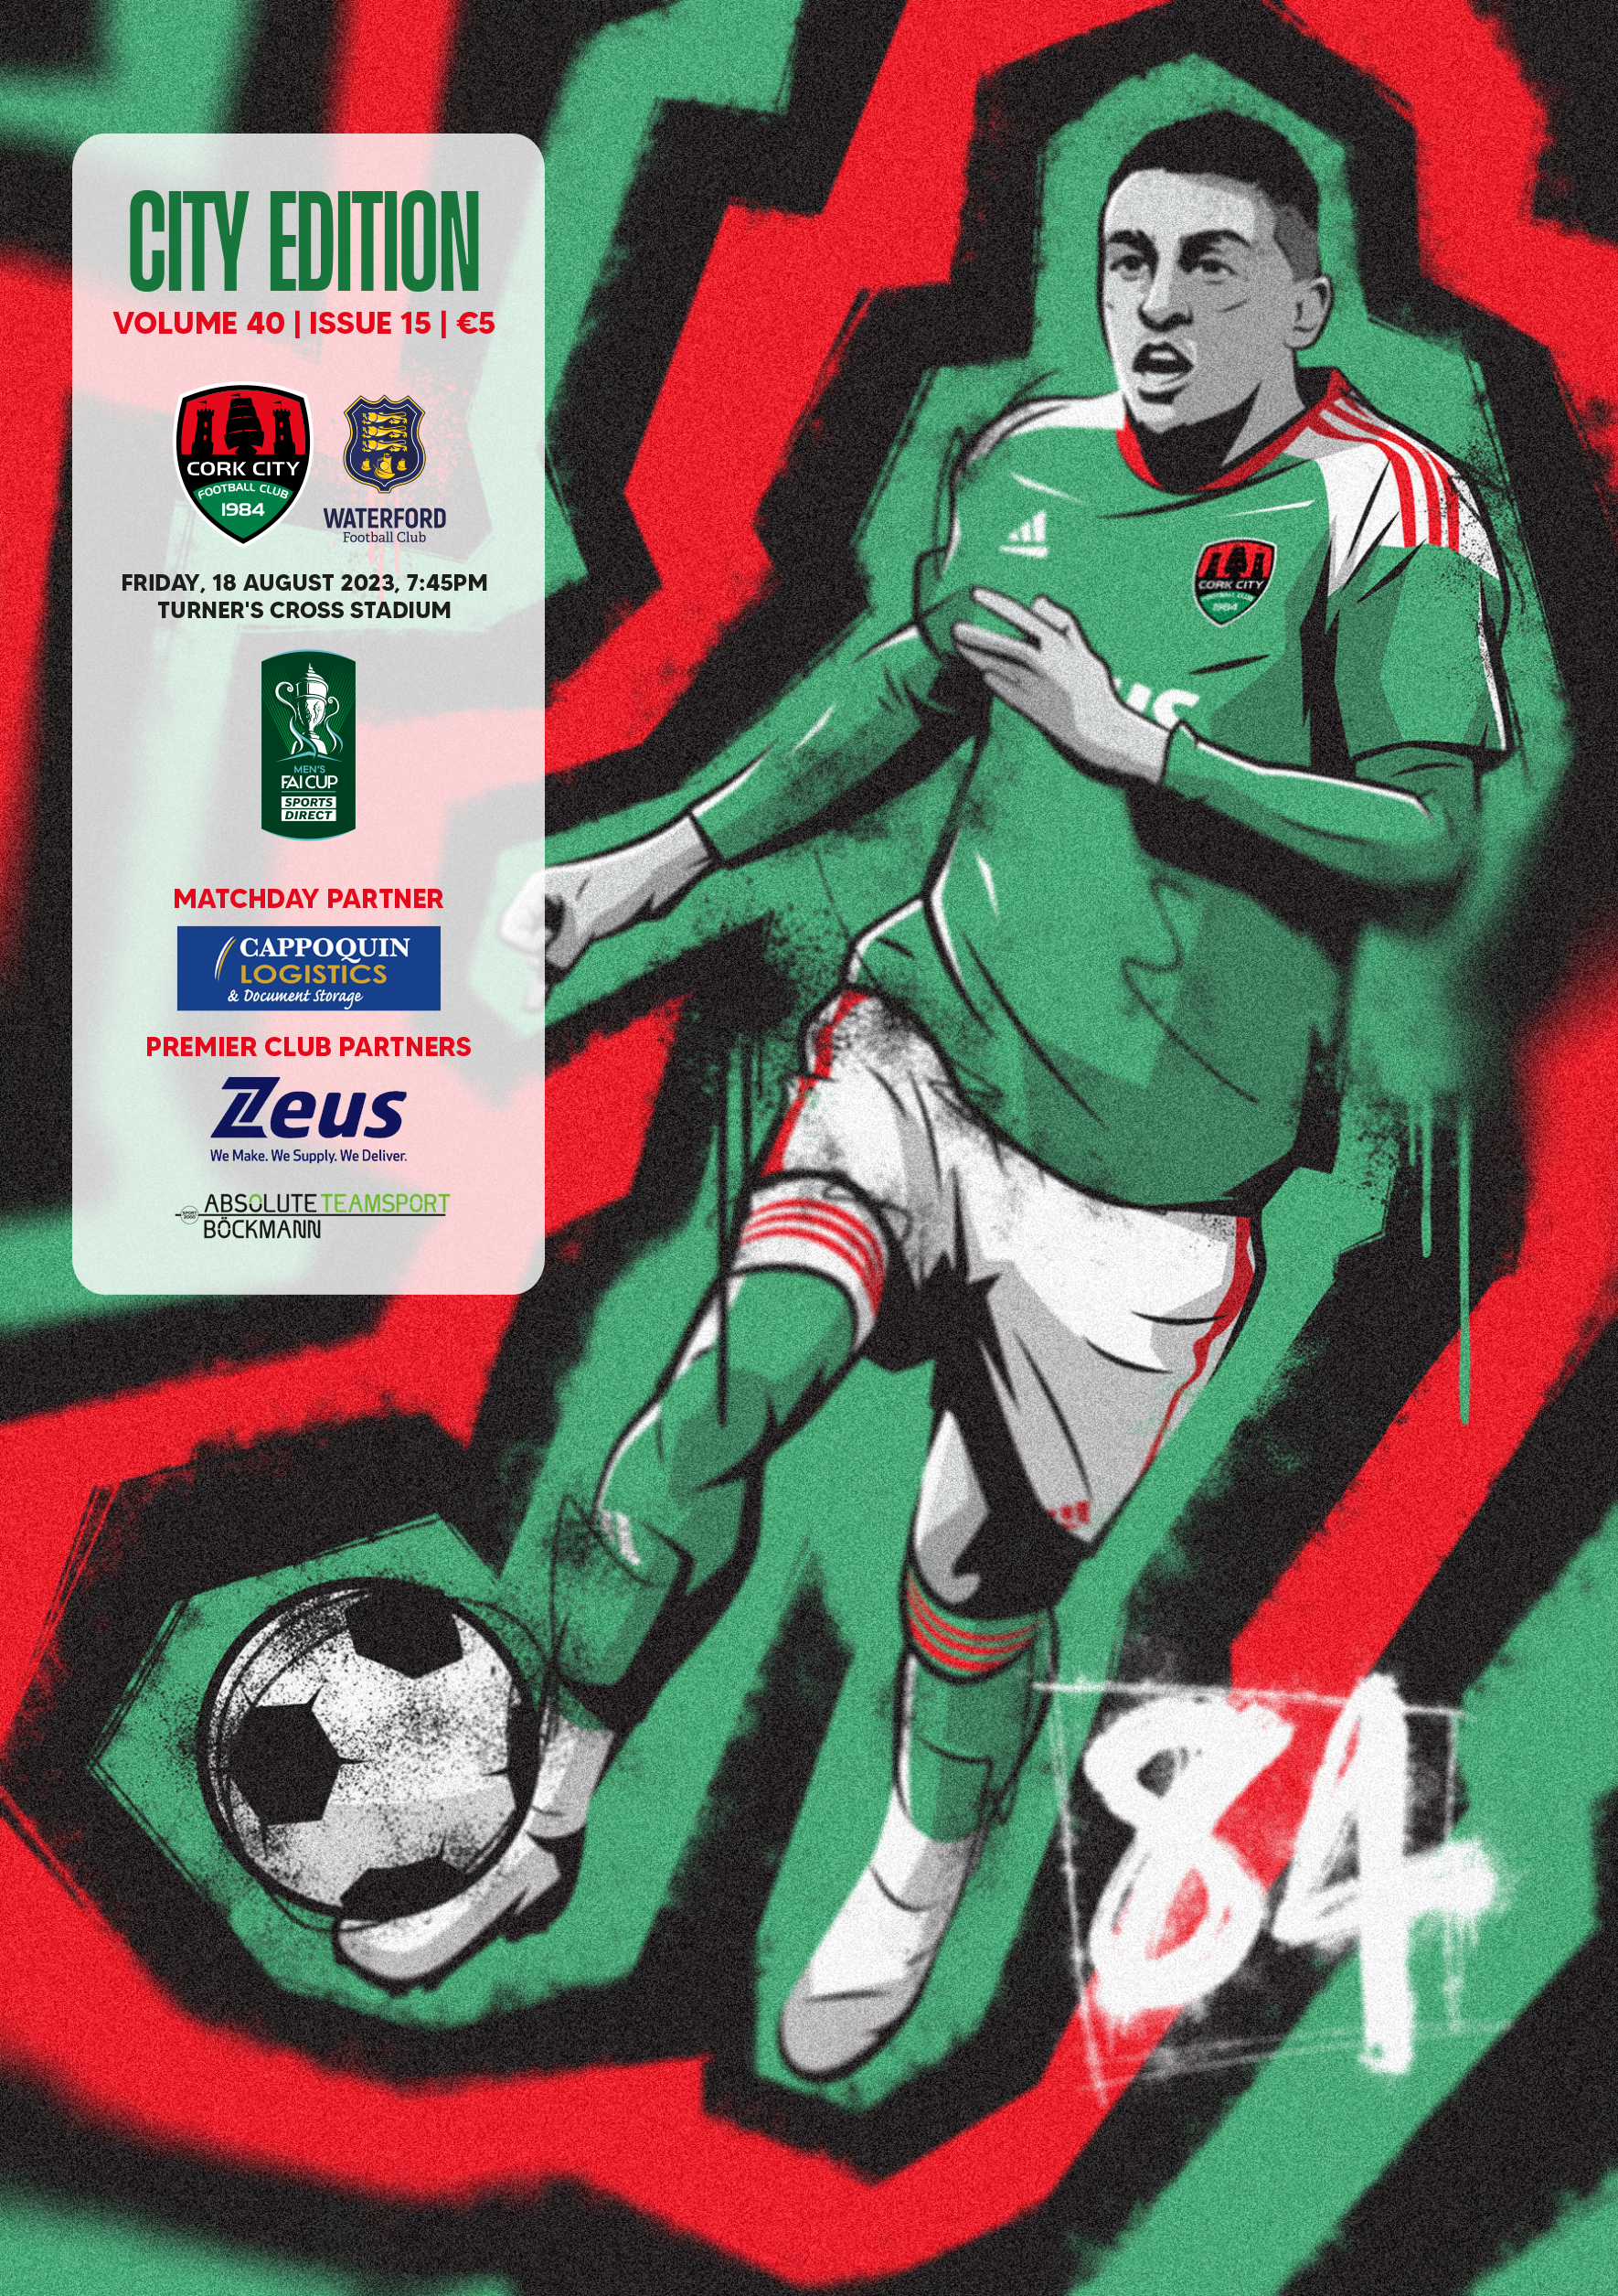 City Edition - CCFC vs Waterford (Volume 40, Issue 15) [PRINT & DIGITAL VERSION]